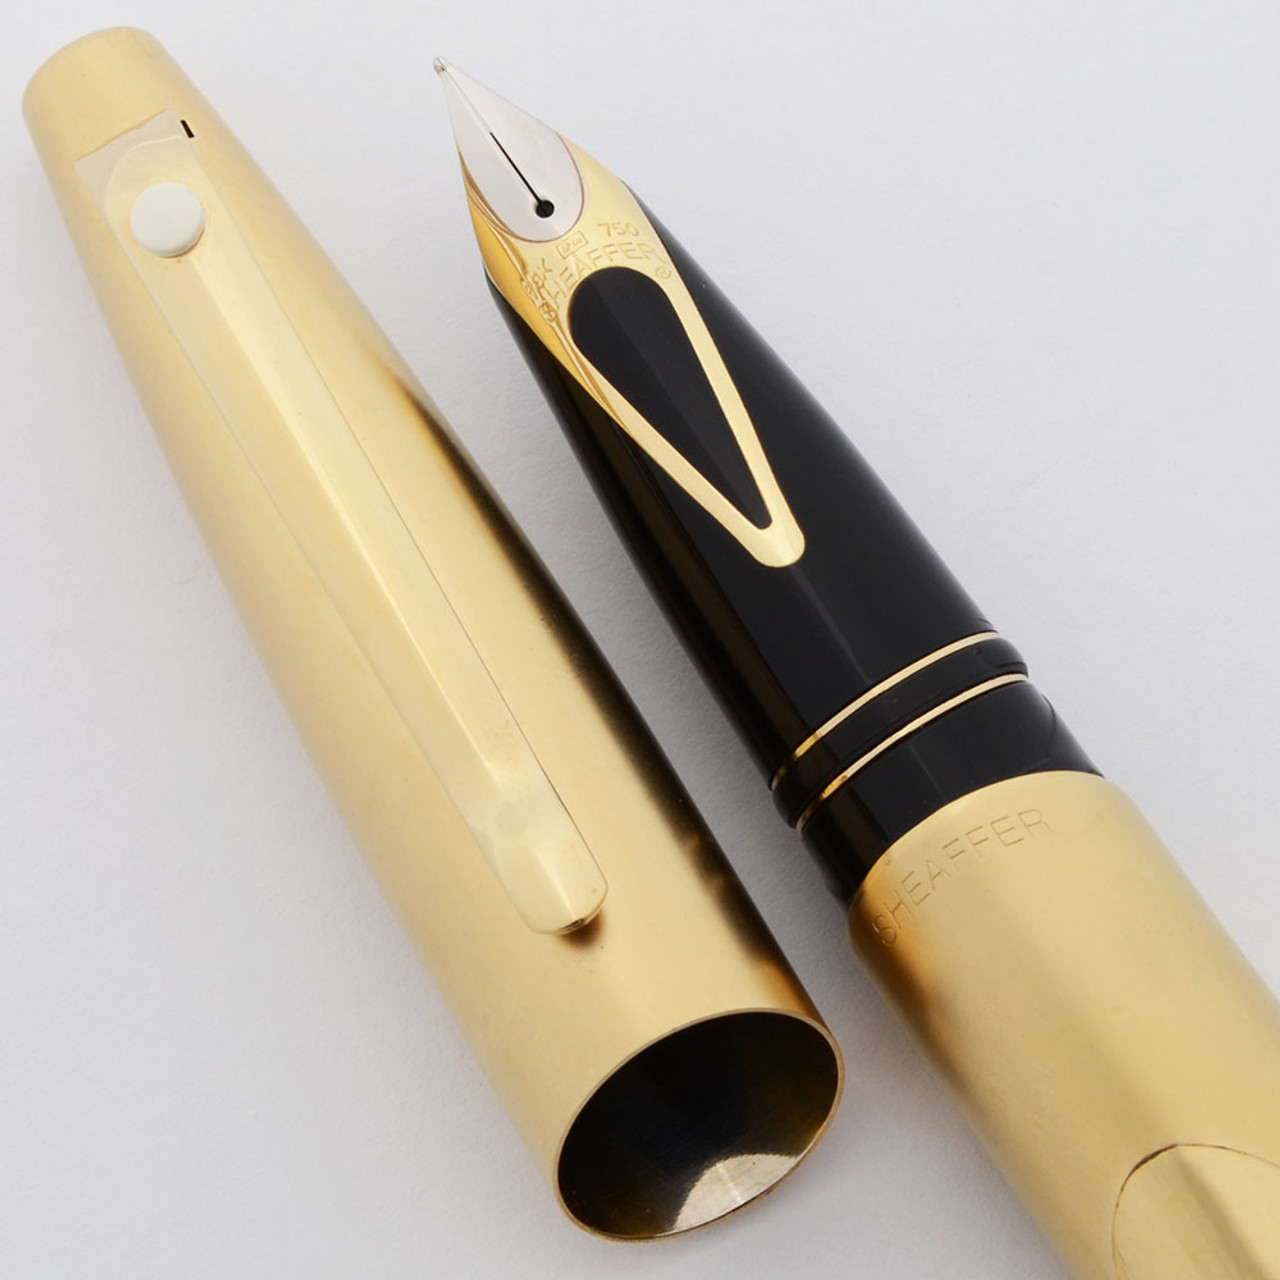 Sheaffer Intrigue Limited Edition Fountain Pen (297/350) - Gold Plated, Medium 18k Nib (Excellent, Includes Converter)